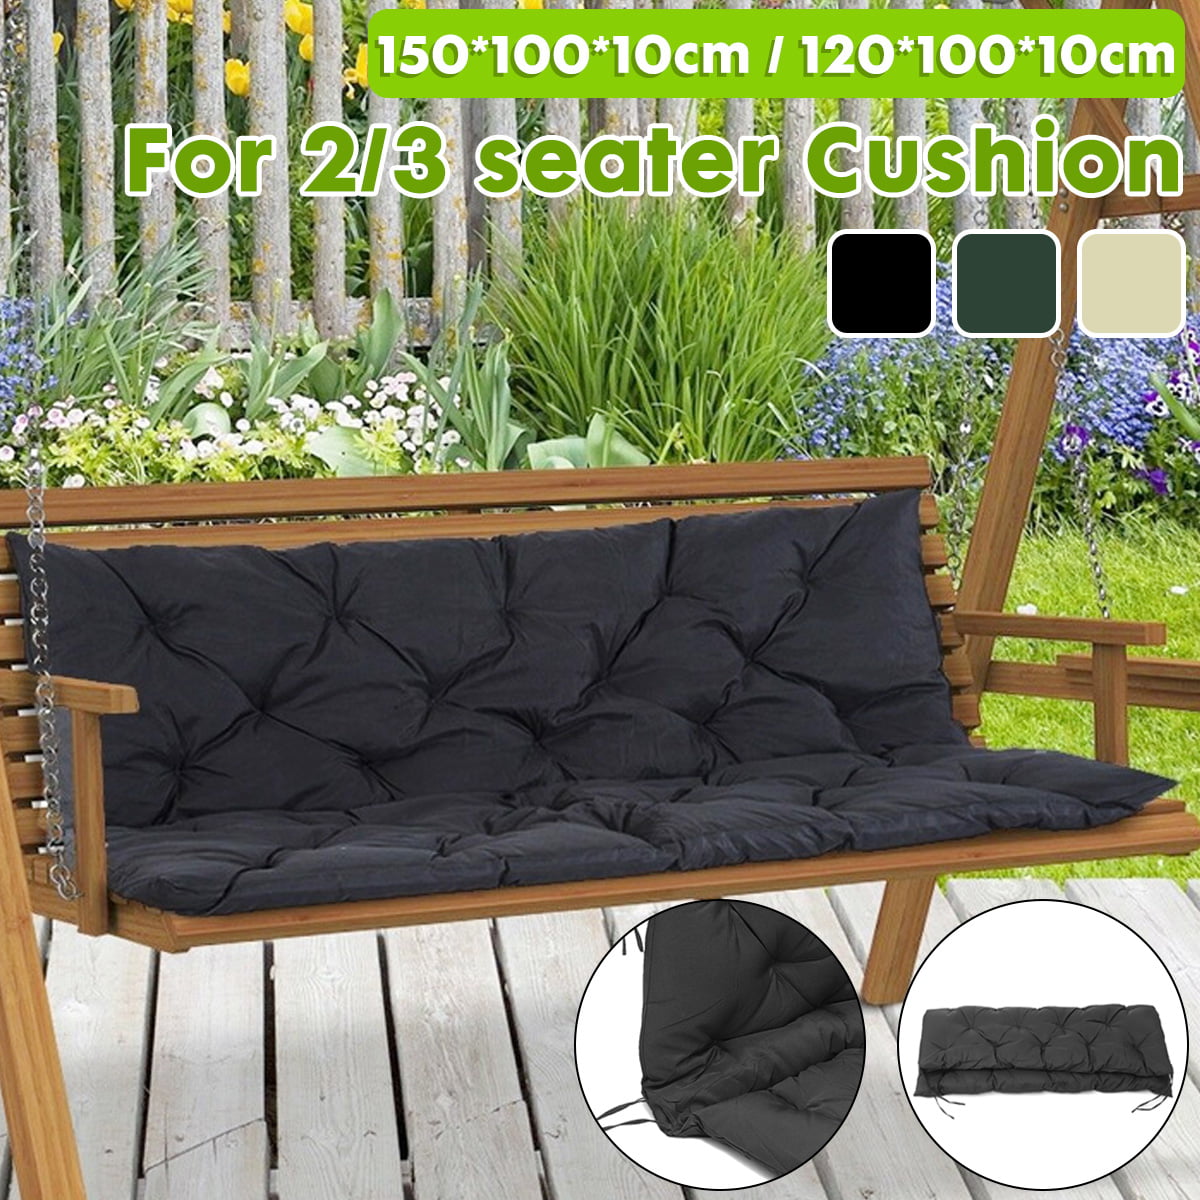 80 * 40 * 3cm,Black chenyu 2-3 Seaters Indoor Outdoor Bench Seat Cushion,80/90/100/120/140/150 Cm Long Bench Seat Cushions for Garden Swing Patio Dining Kitchen